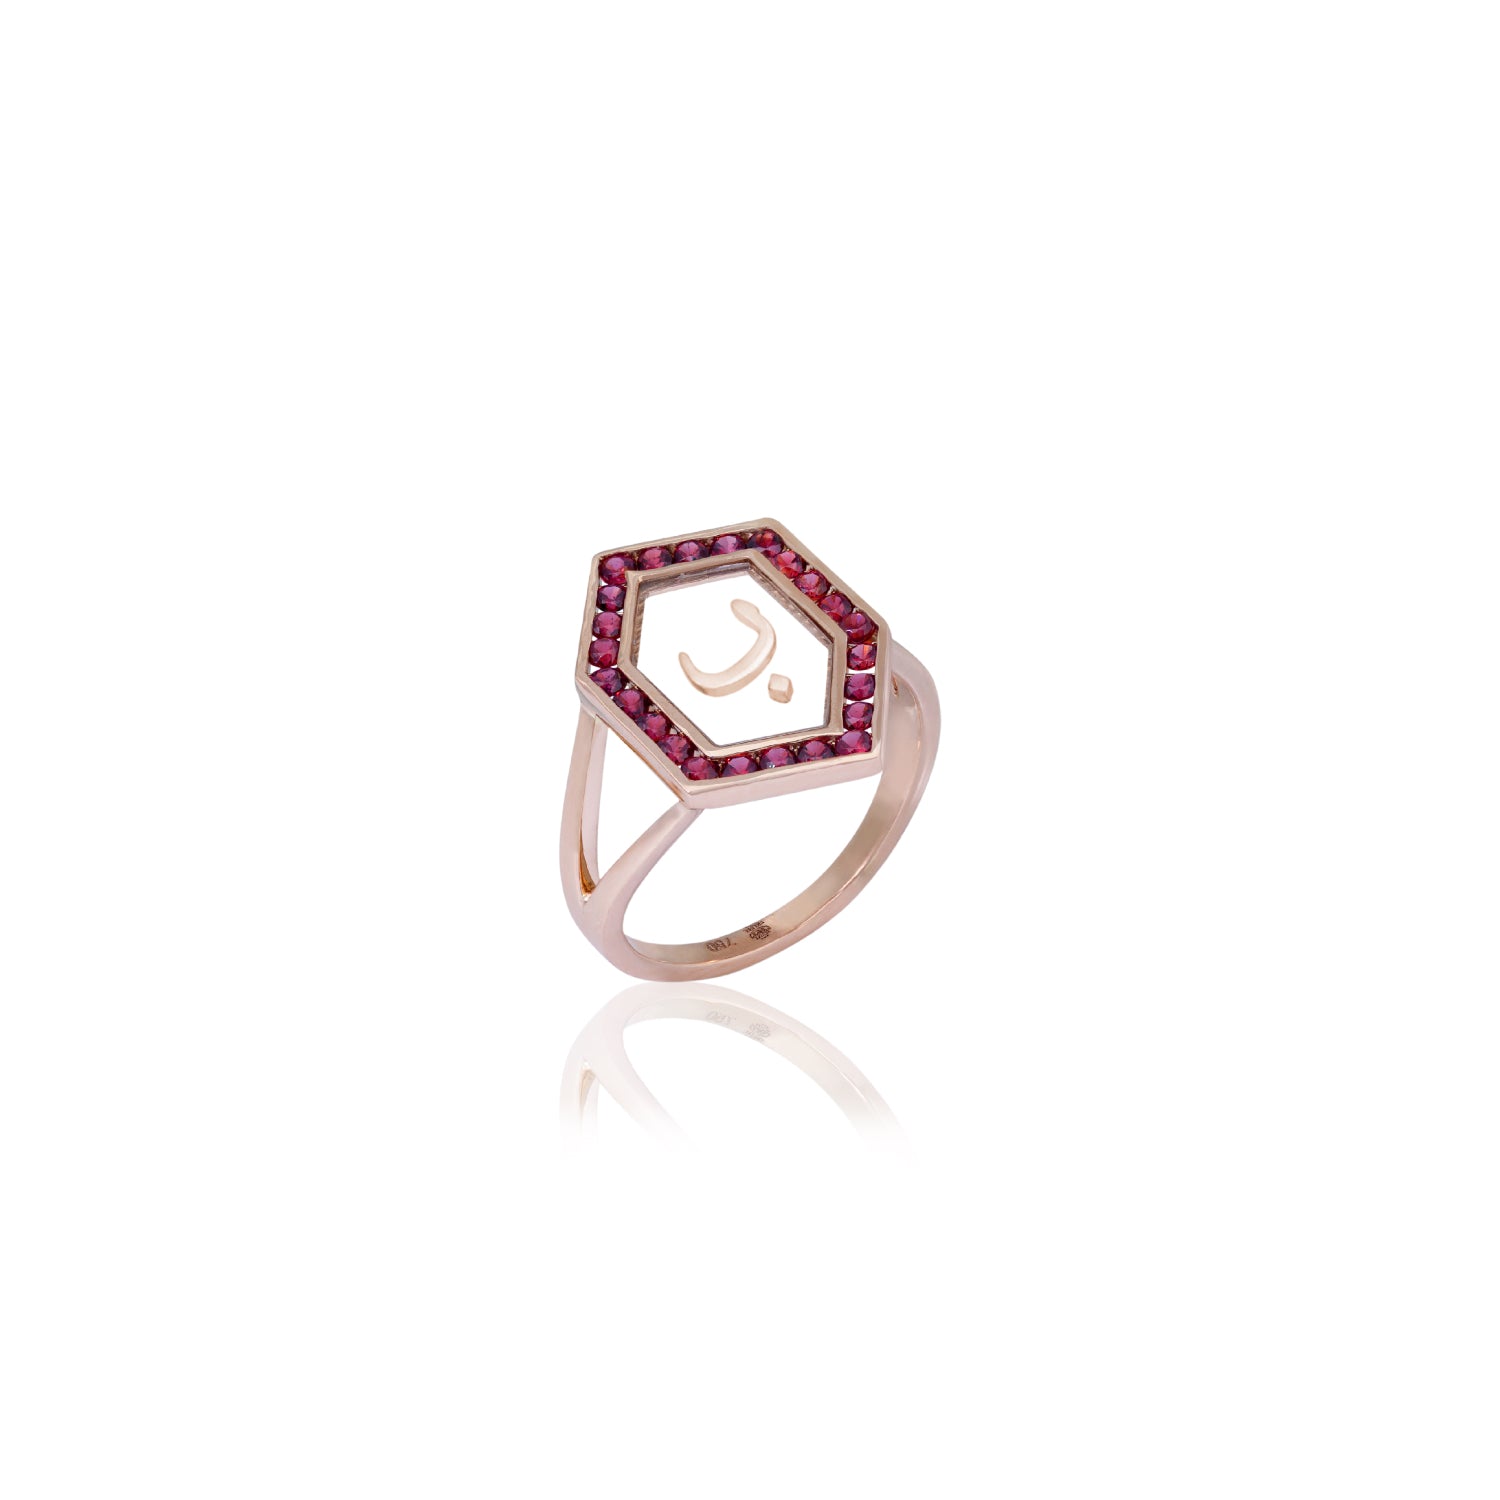 Qamoos 1.0 Letter ب Ruby Ring in Rose Gold